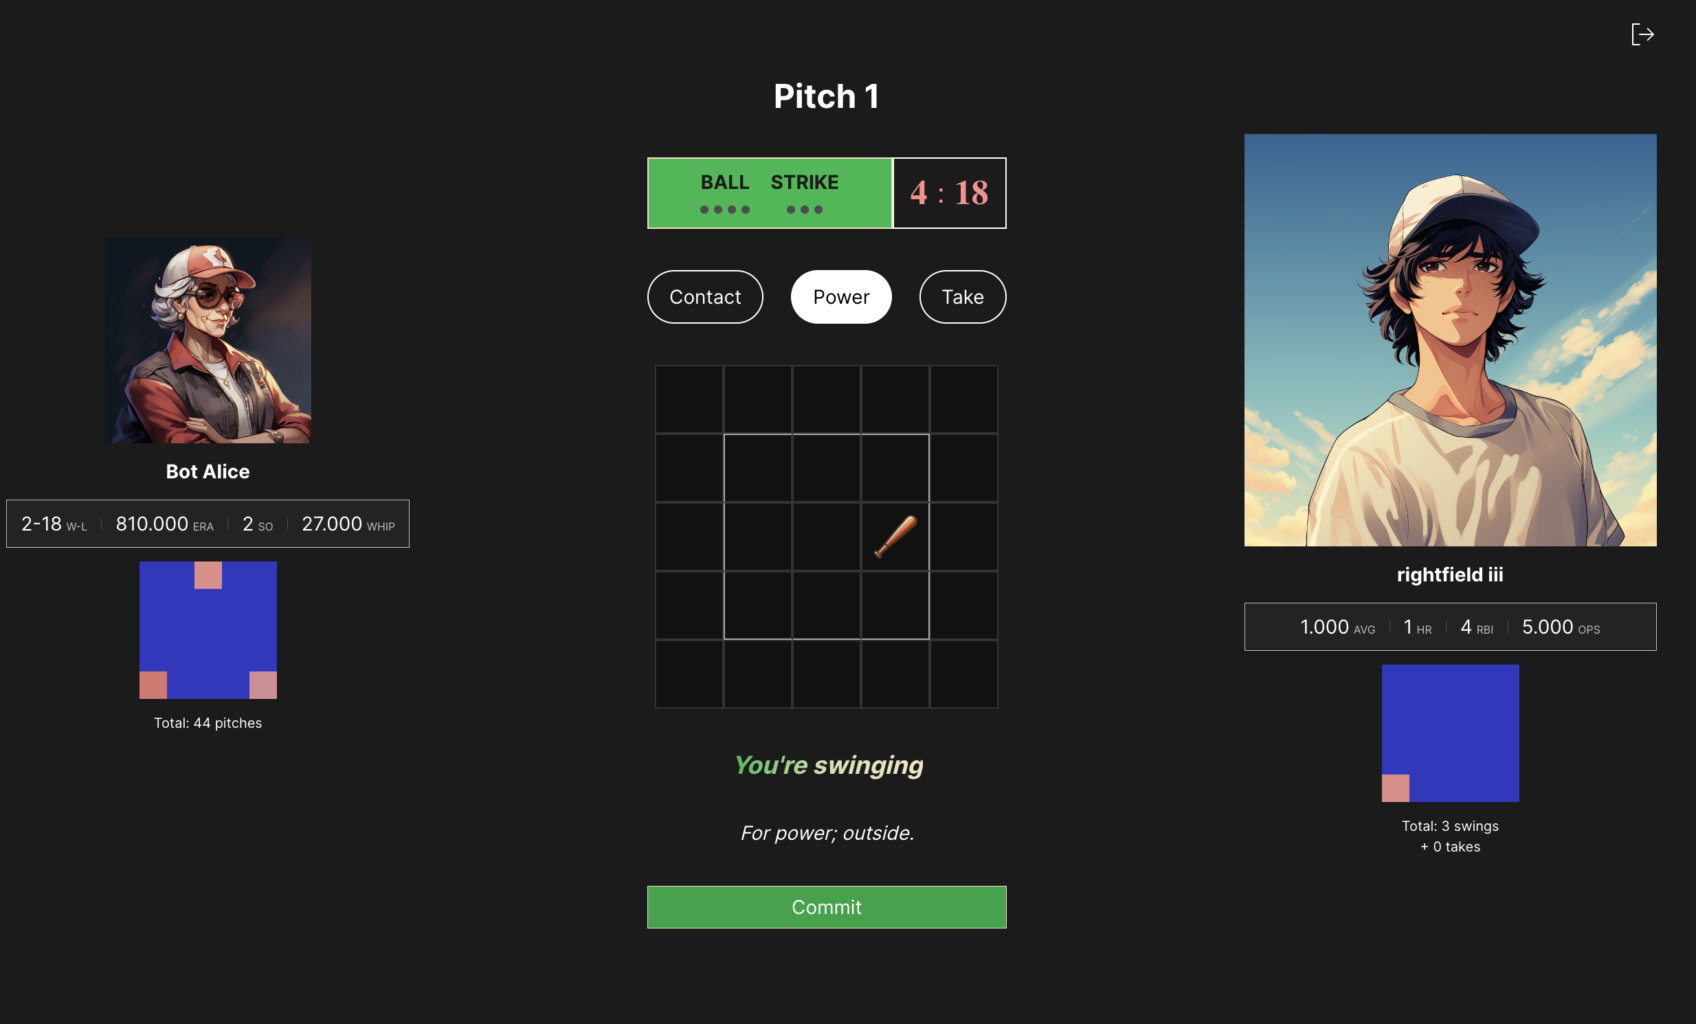 An image of the game UI with the pitcher on the left, the batter on the right, and a square 5x5 grid in the middle.